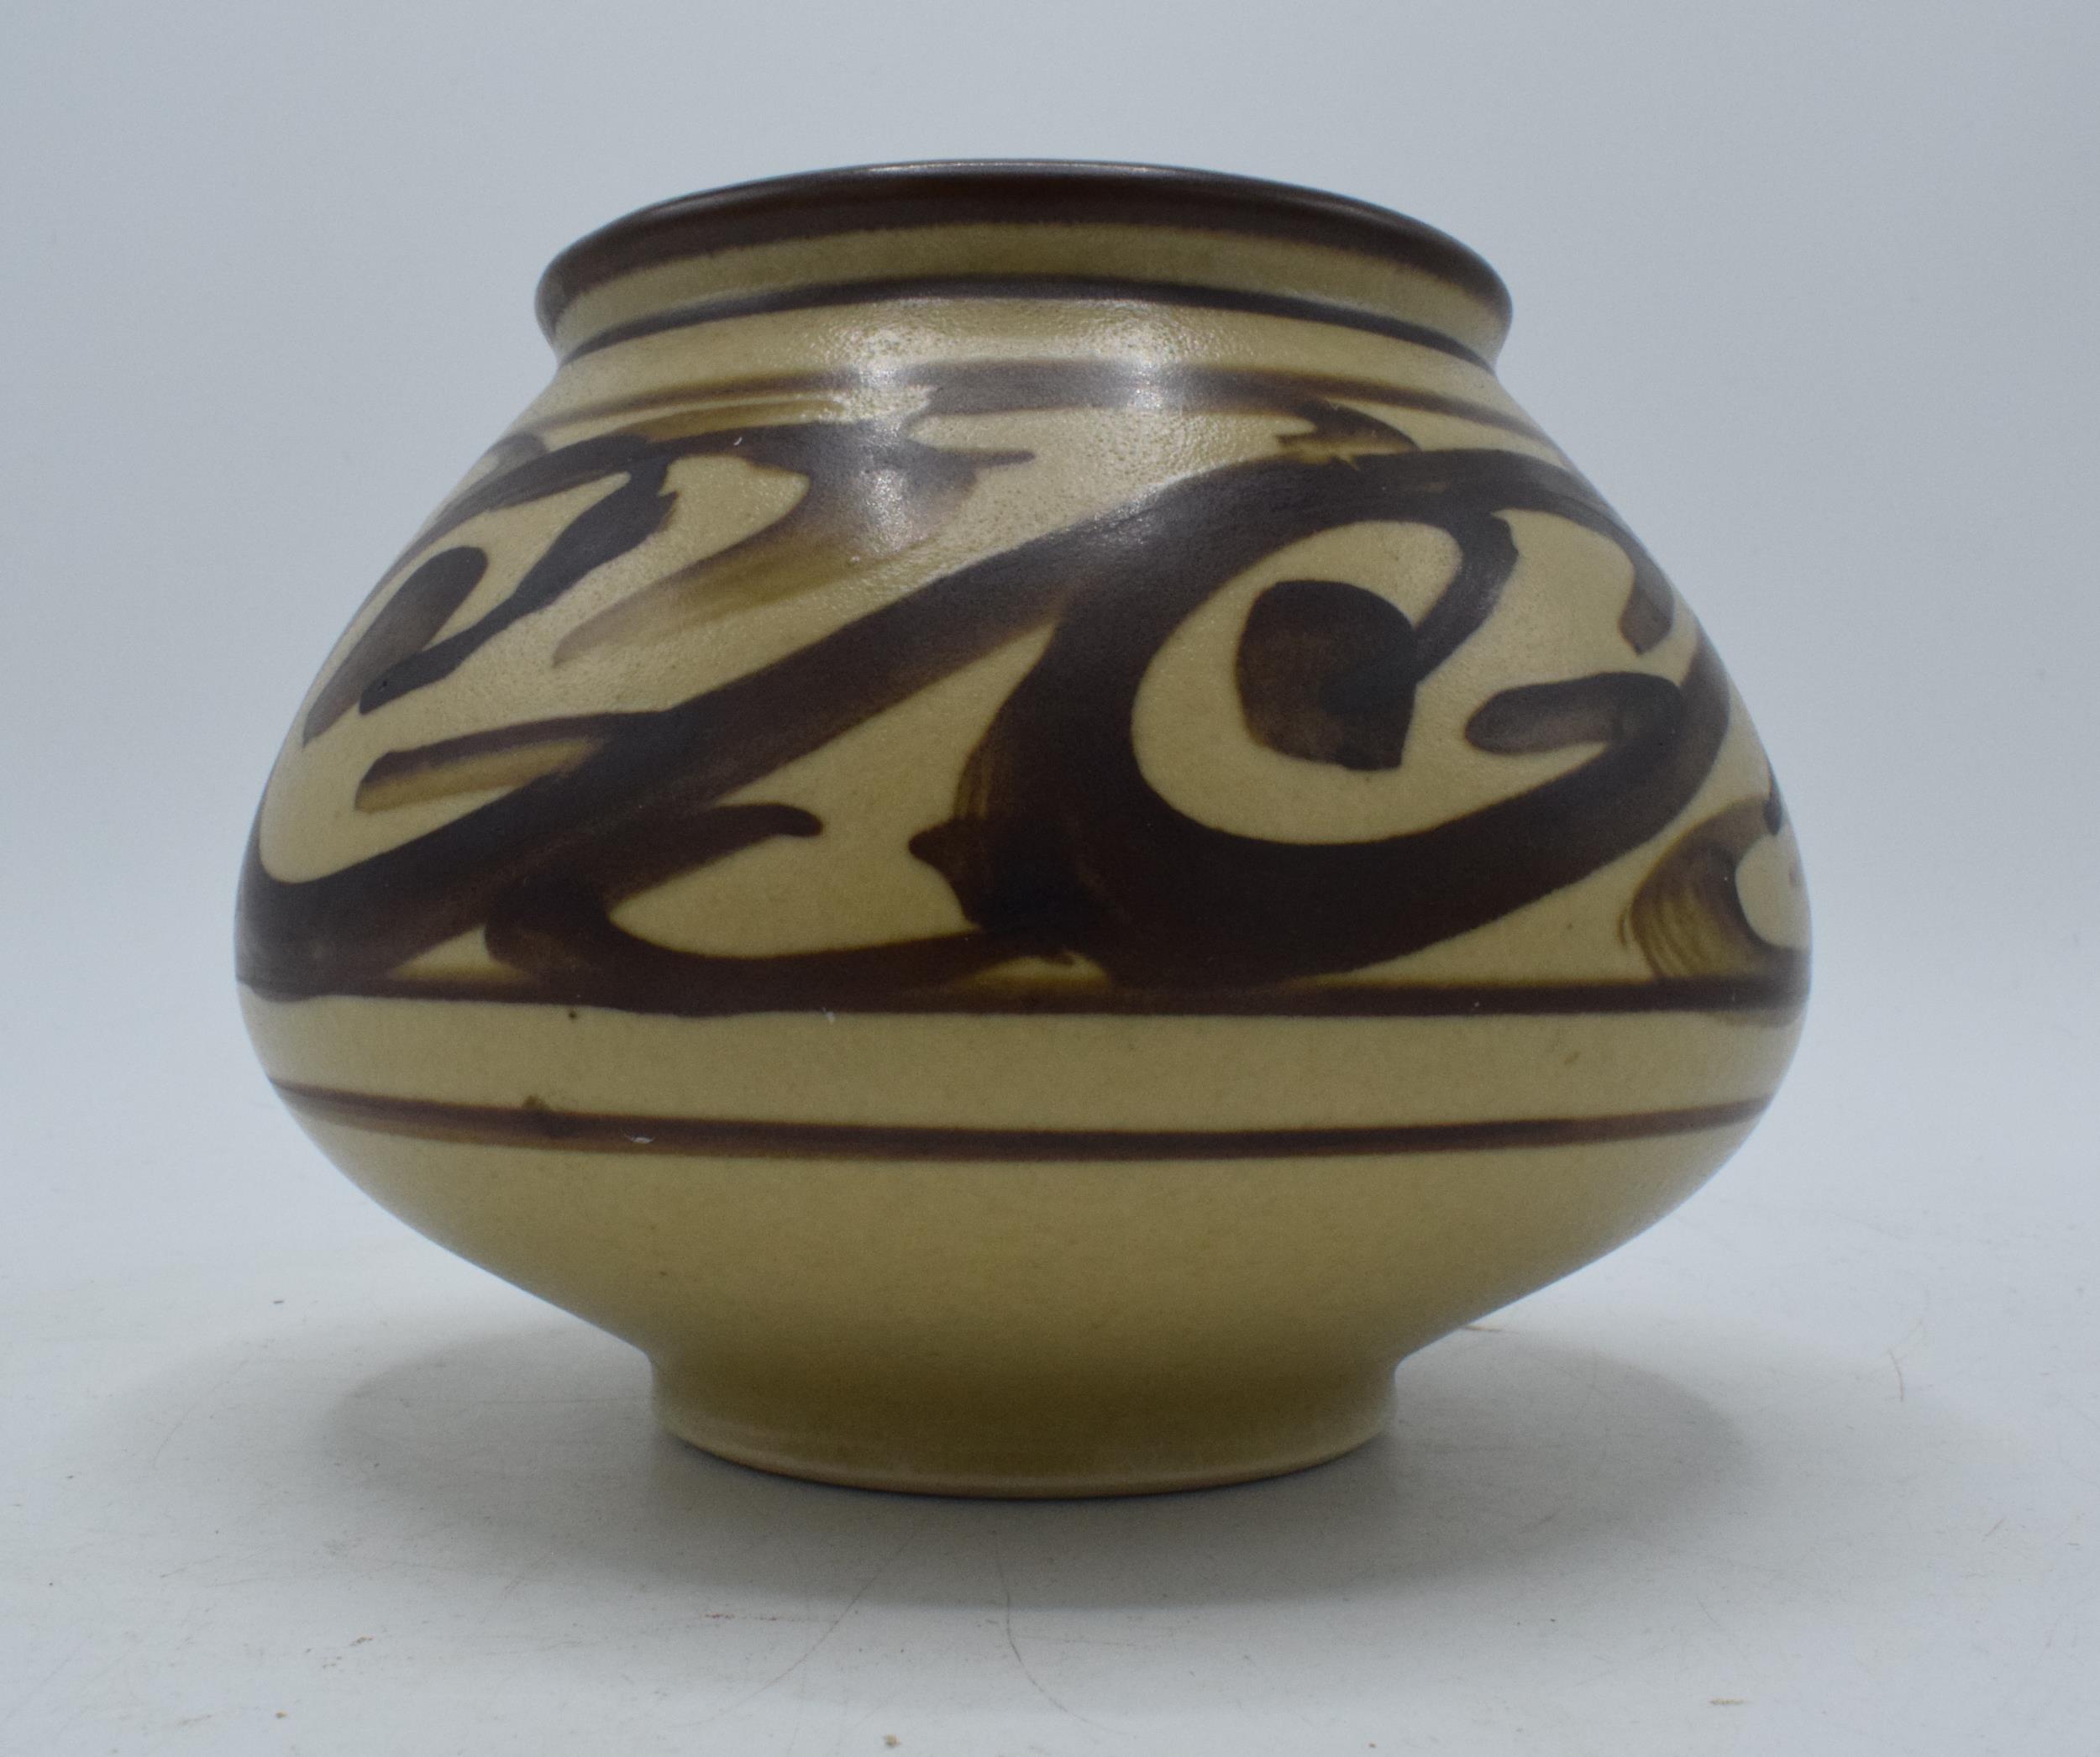 Mid-century Bullers Vase, Agnete Hoy studio potter with Butter's Ltd from 1932 - 1952. Height 9.5cm.